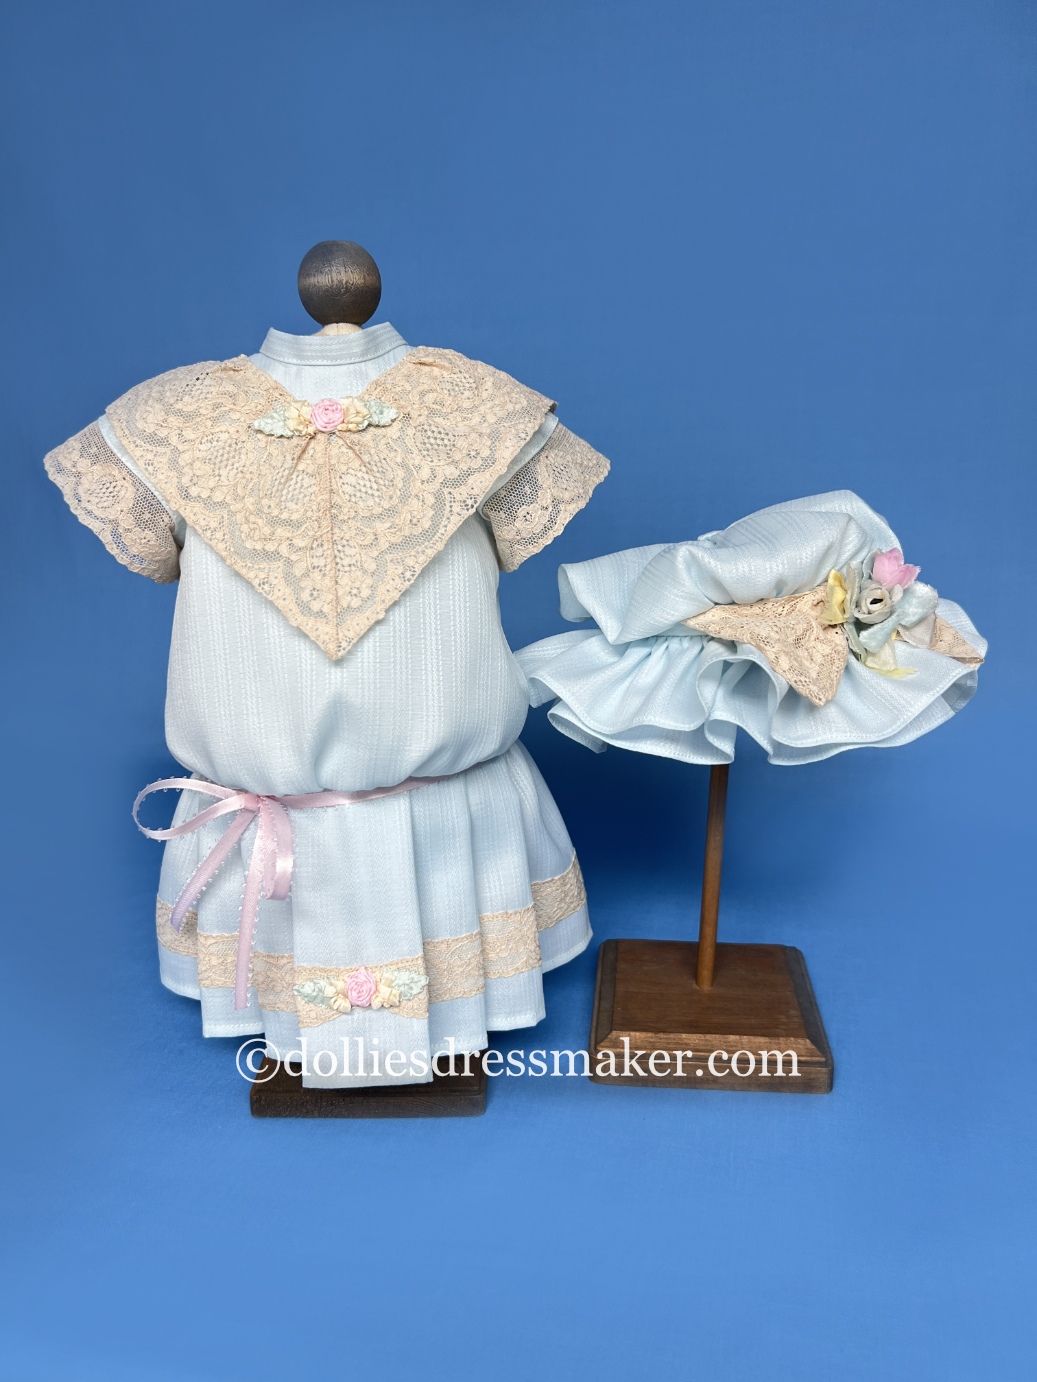 Dress with Vintage Lace and Mob Cap | American Girl Doll Samantha • Nellie